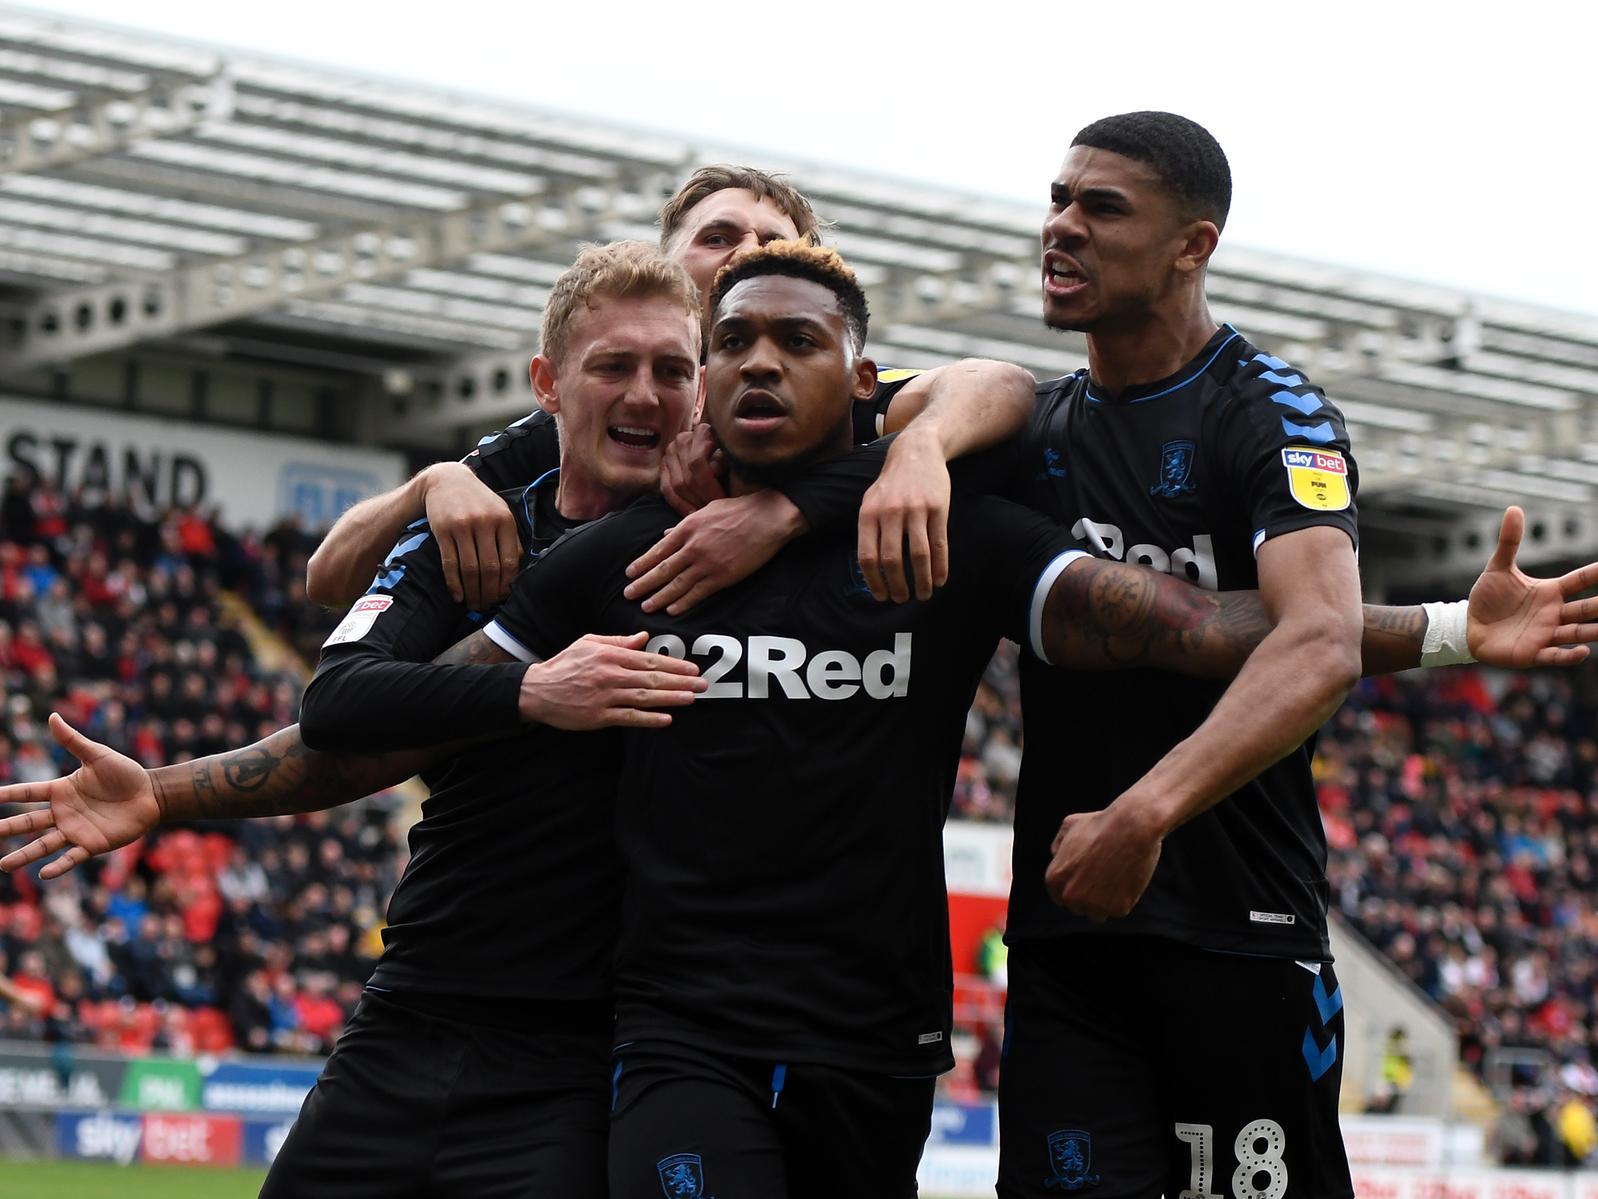 Leeds United have been linked with a shock move for Middlesbrough's 15 million striker Britt Assombalonga, who scored a total of 29 league goals over the previous two league campaigns. (Daily Mirror)